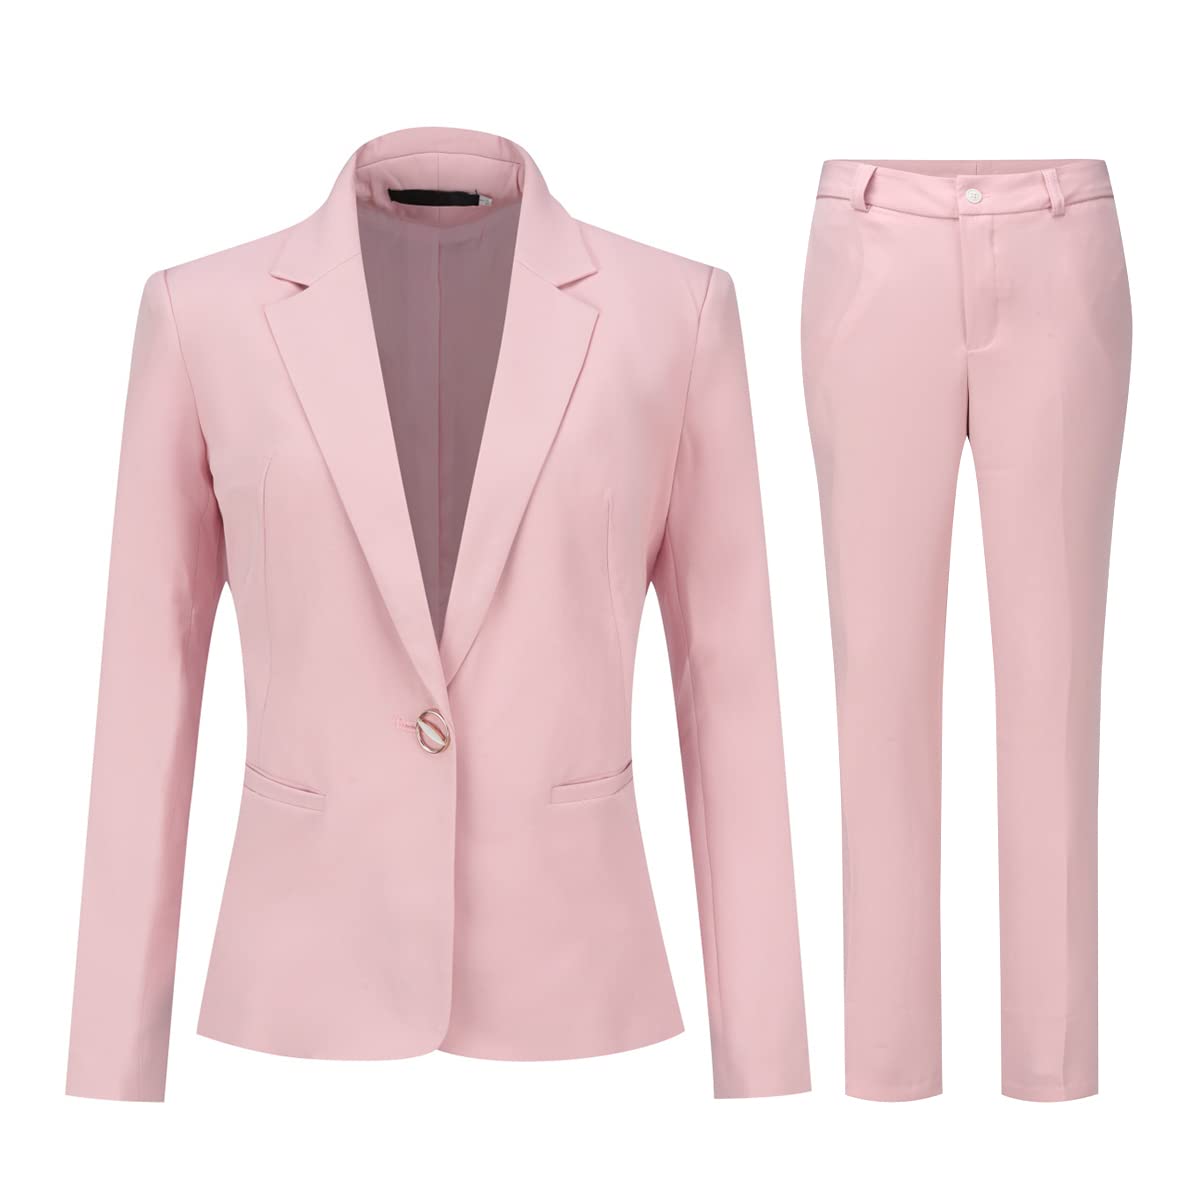 YUNCLOS Womens 2 Piece Office Work Suit Set One Button Blazer and Pants Pink